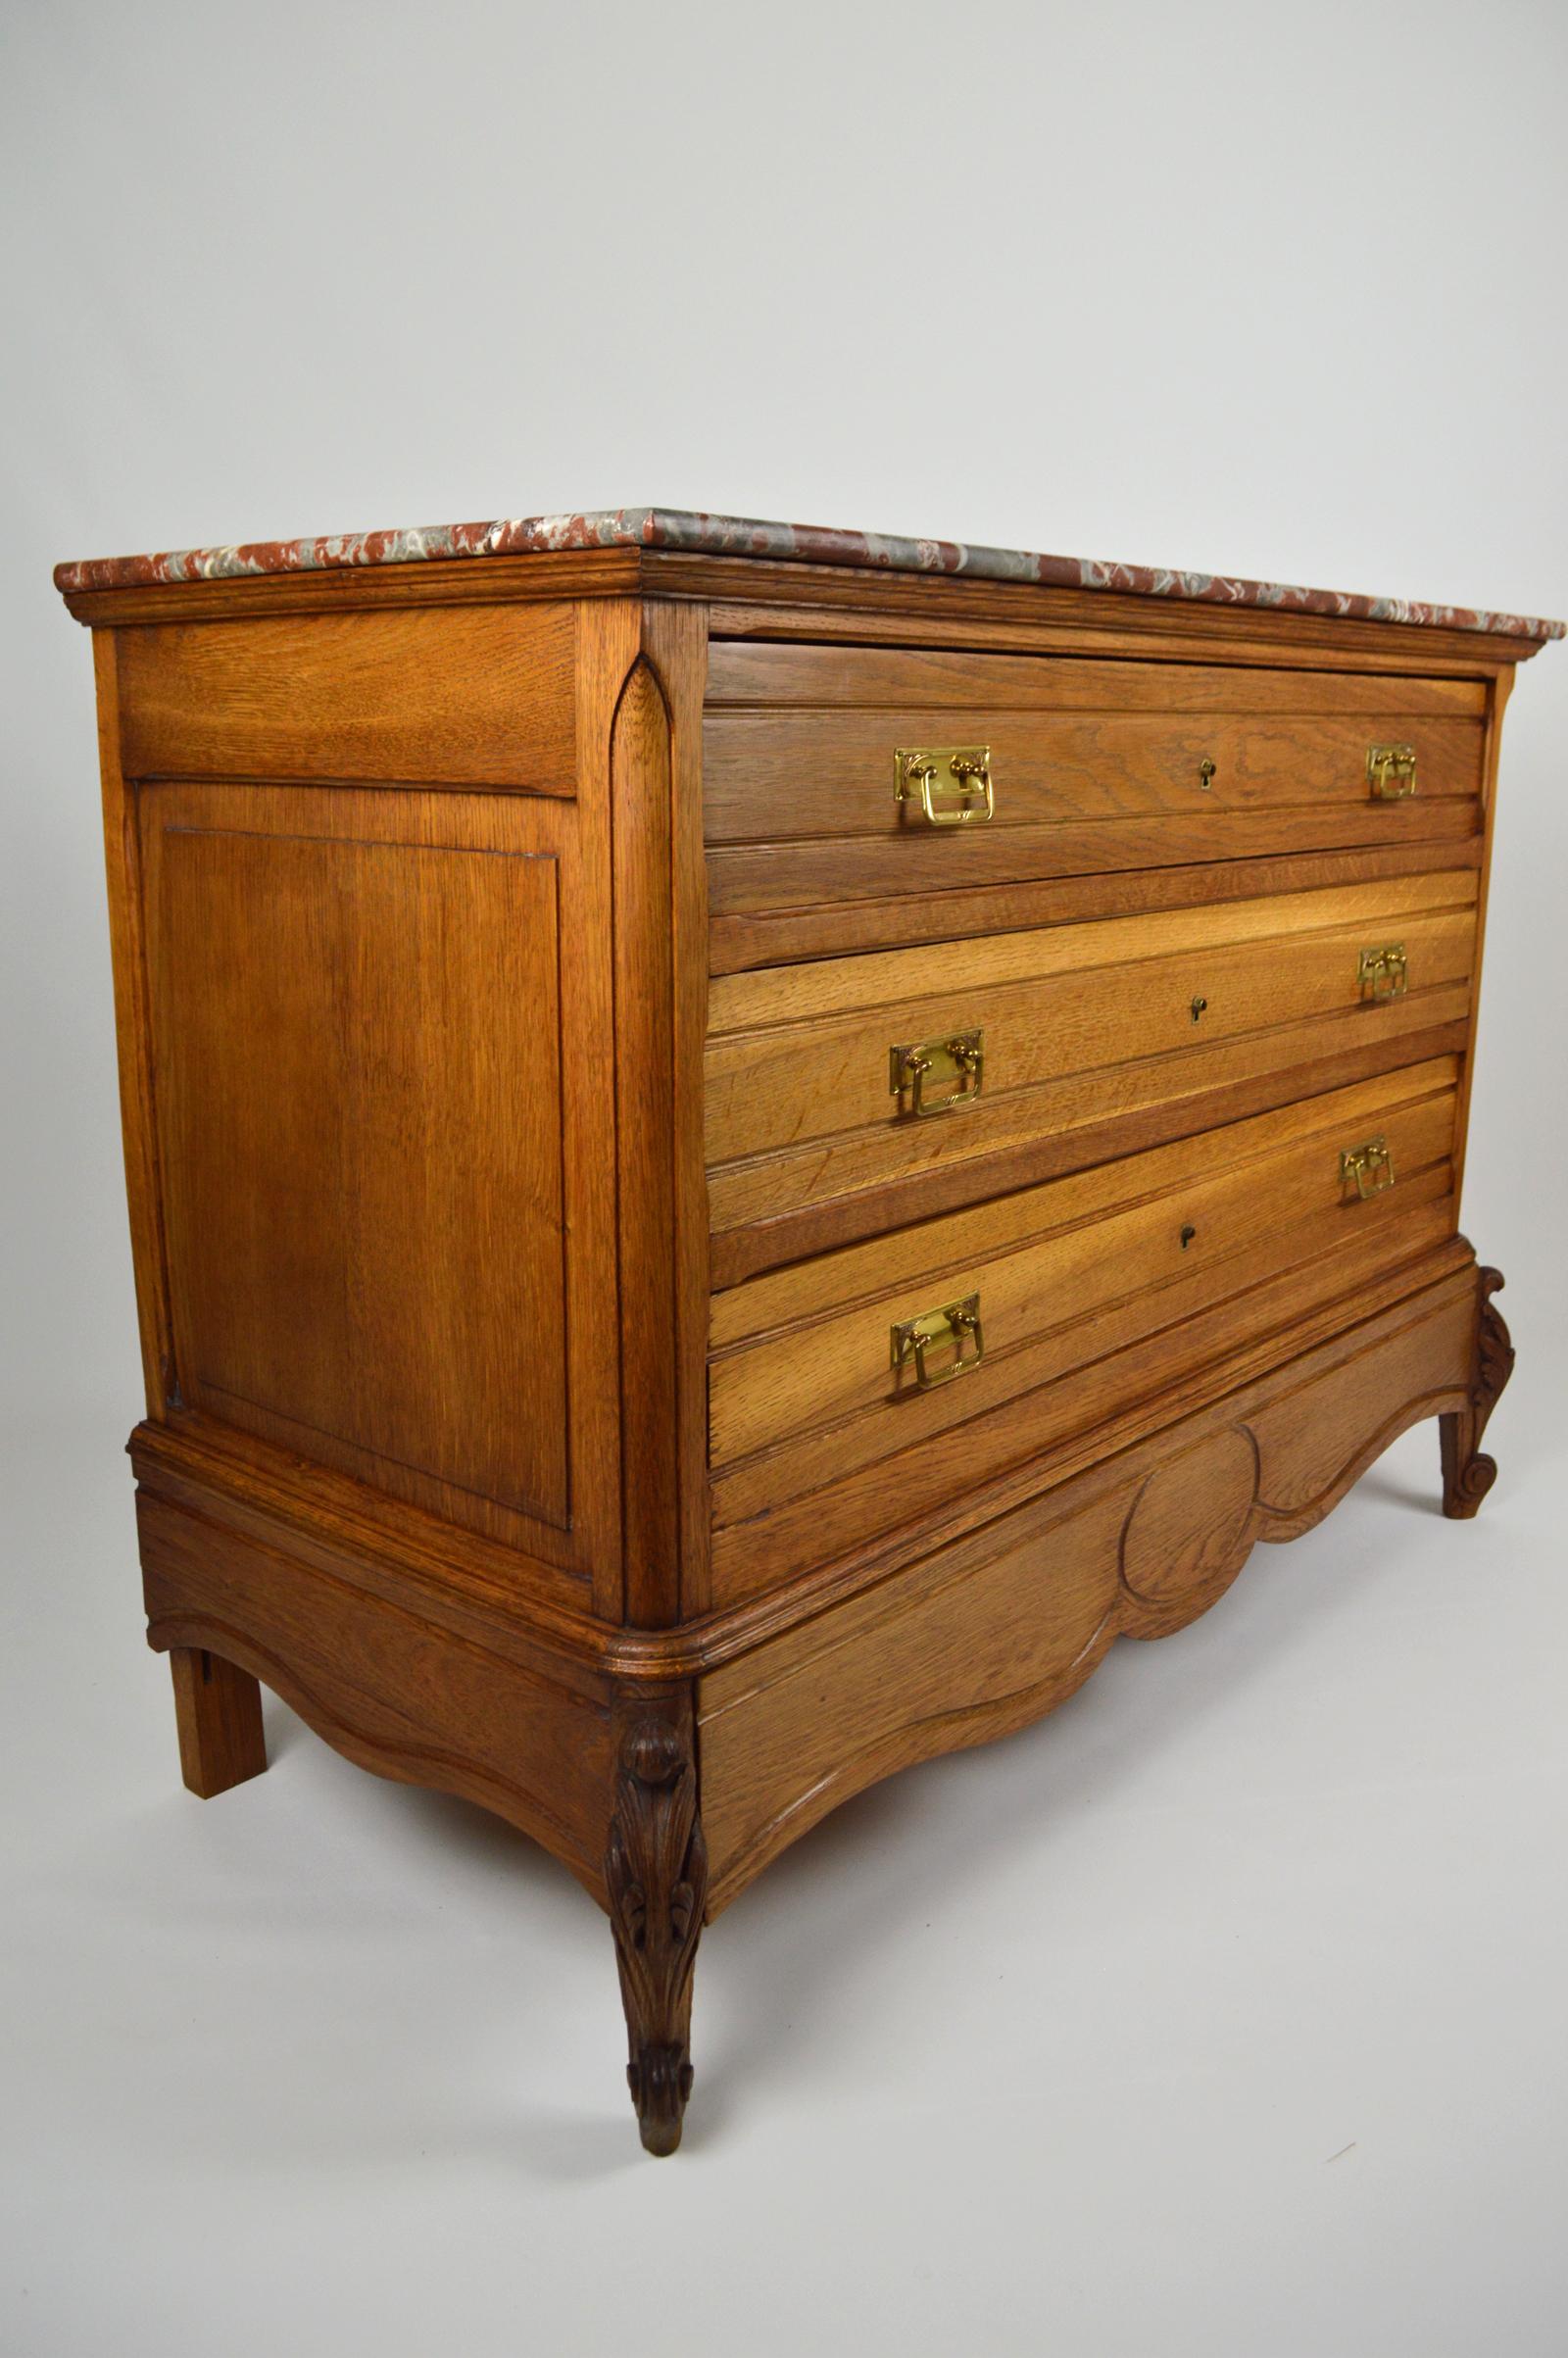 Superb Belle Époque commode or chest of drawers.

In oak, top in red marble, brass handles.

4 drawers, including 1 